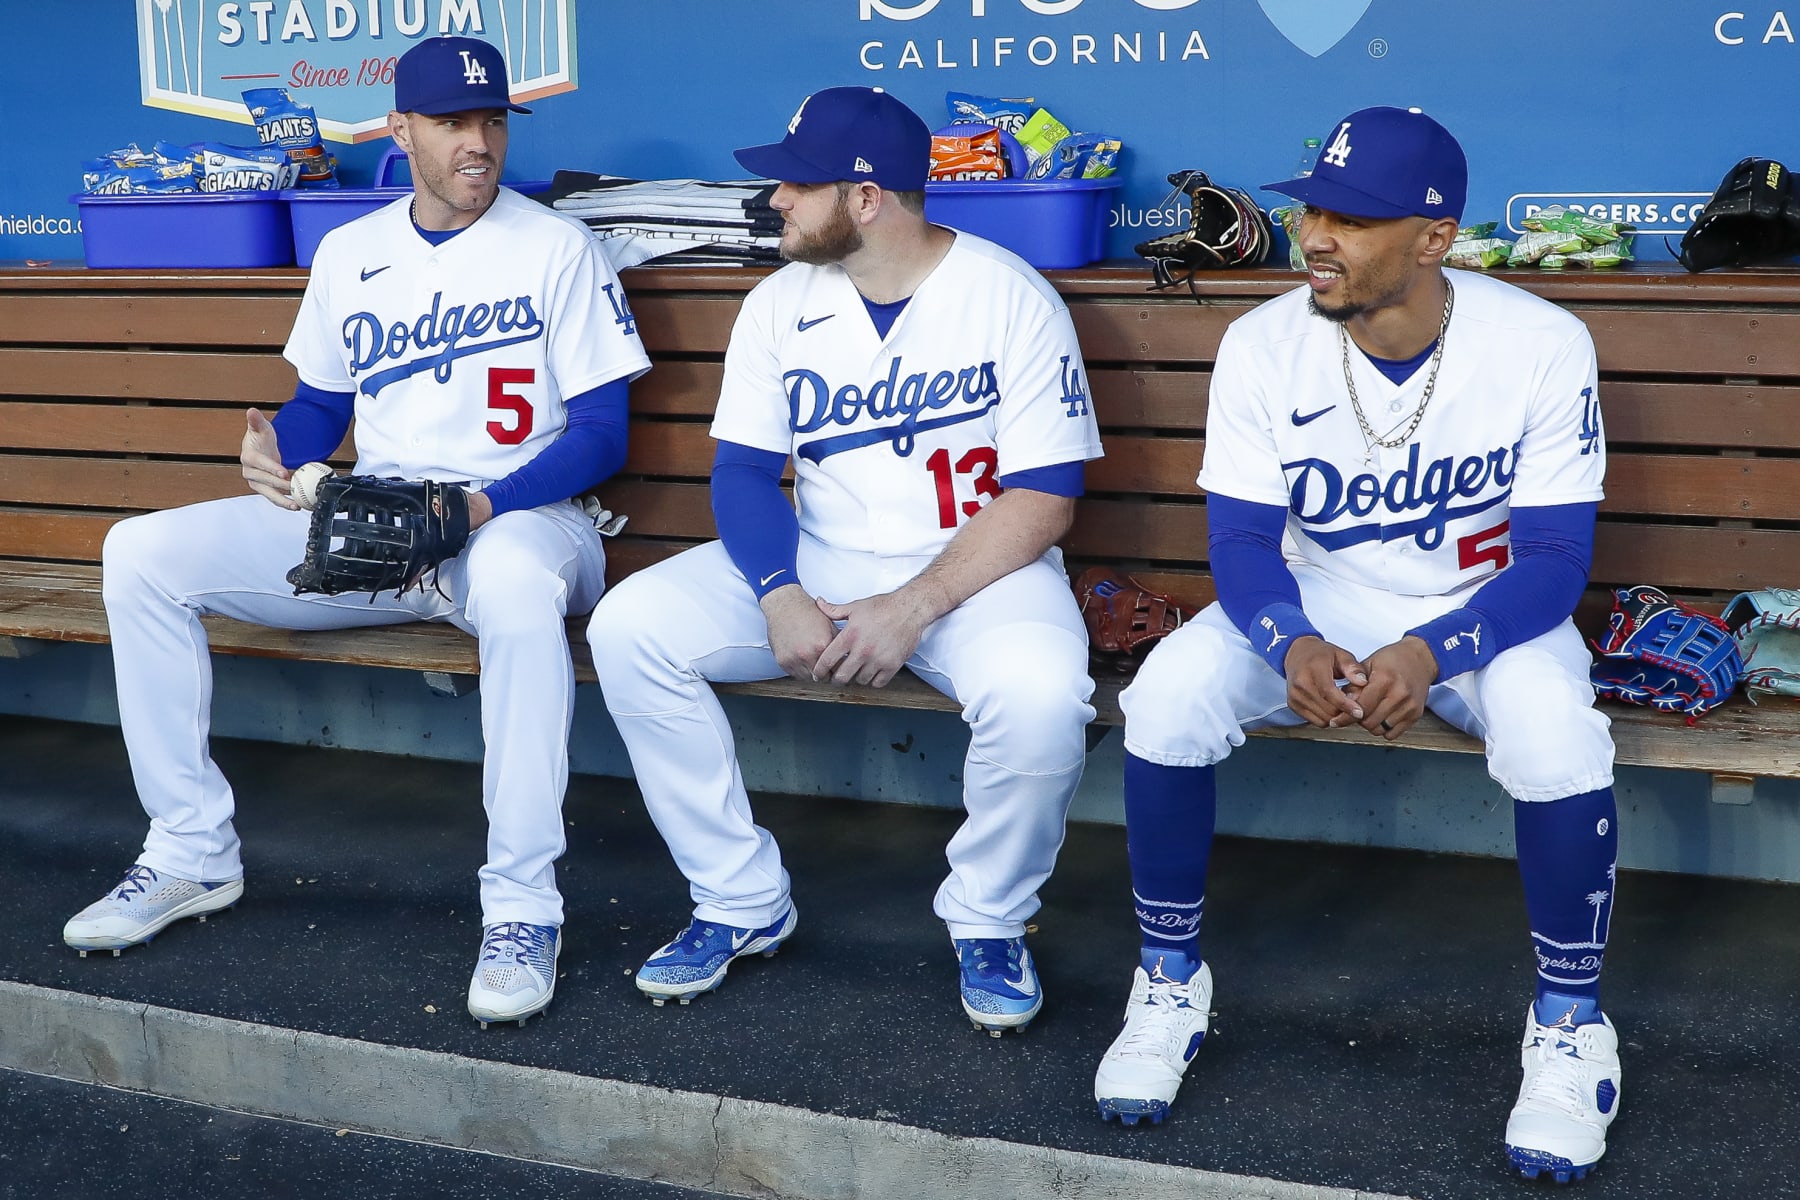 Los Angeles Dodgers Roster - 2023 Season - MLB Players & Starters